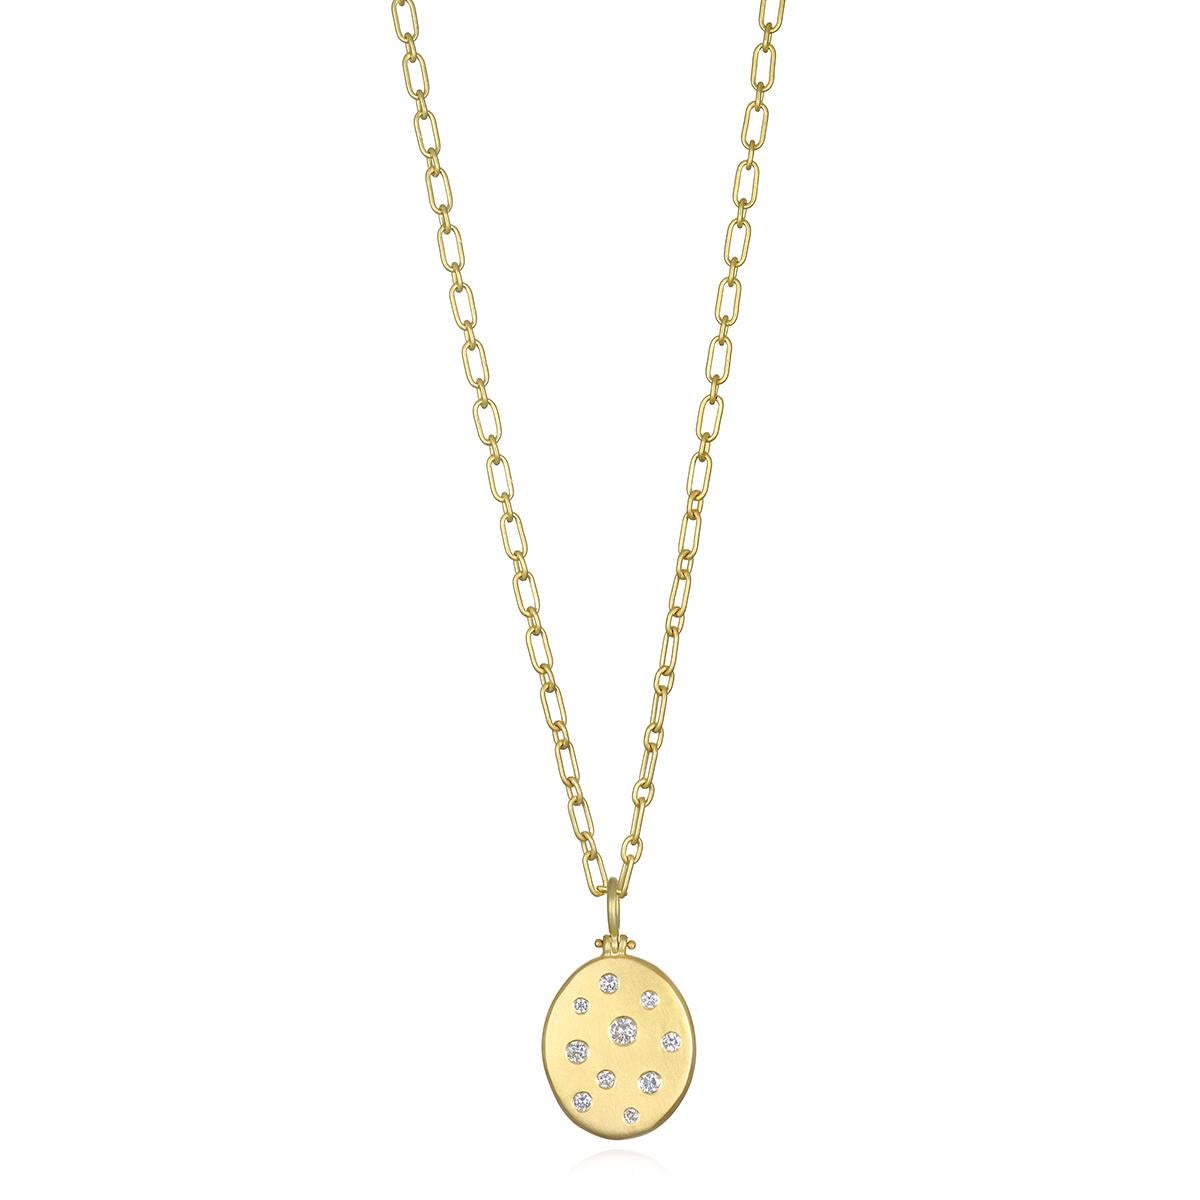 Classic and versatile, Faye Kim's 18 Karat Gold Mini Paperclip Vintage Link Chain, with its small connecting oval links, is a must have for every jewelry wardrobe. This versatile piece can be worn alone or as a layering piece with other chains